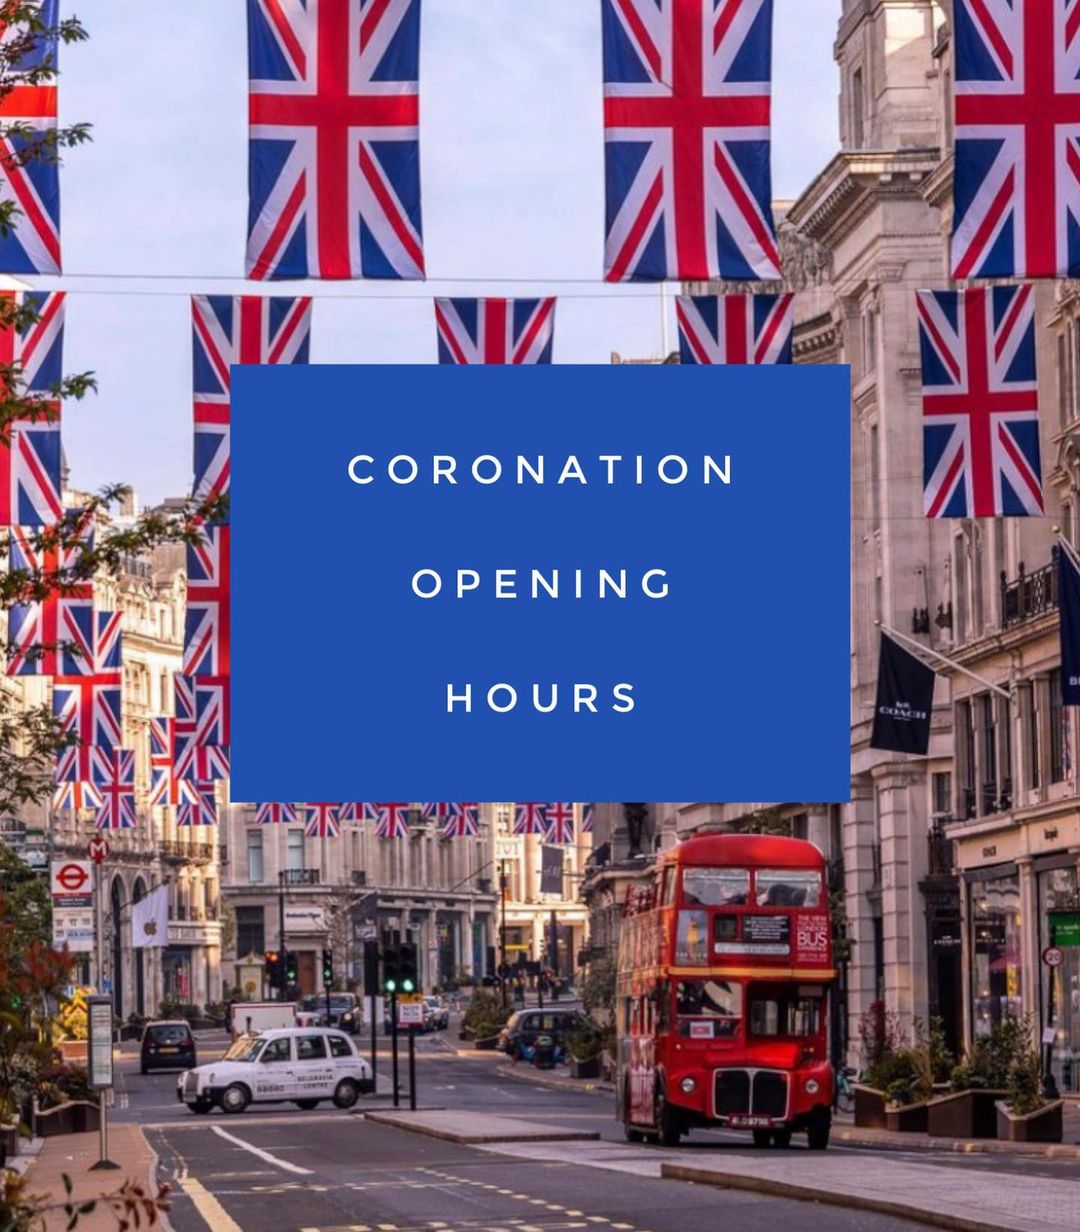 The King’s Coronation – Opening Hours